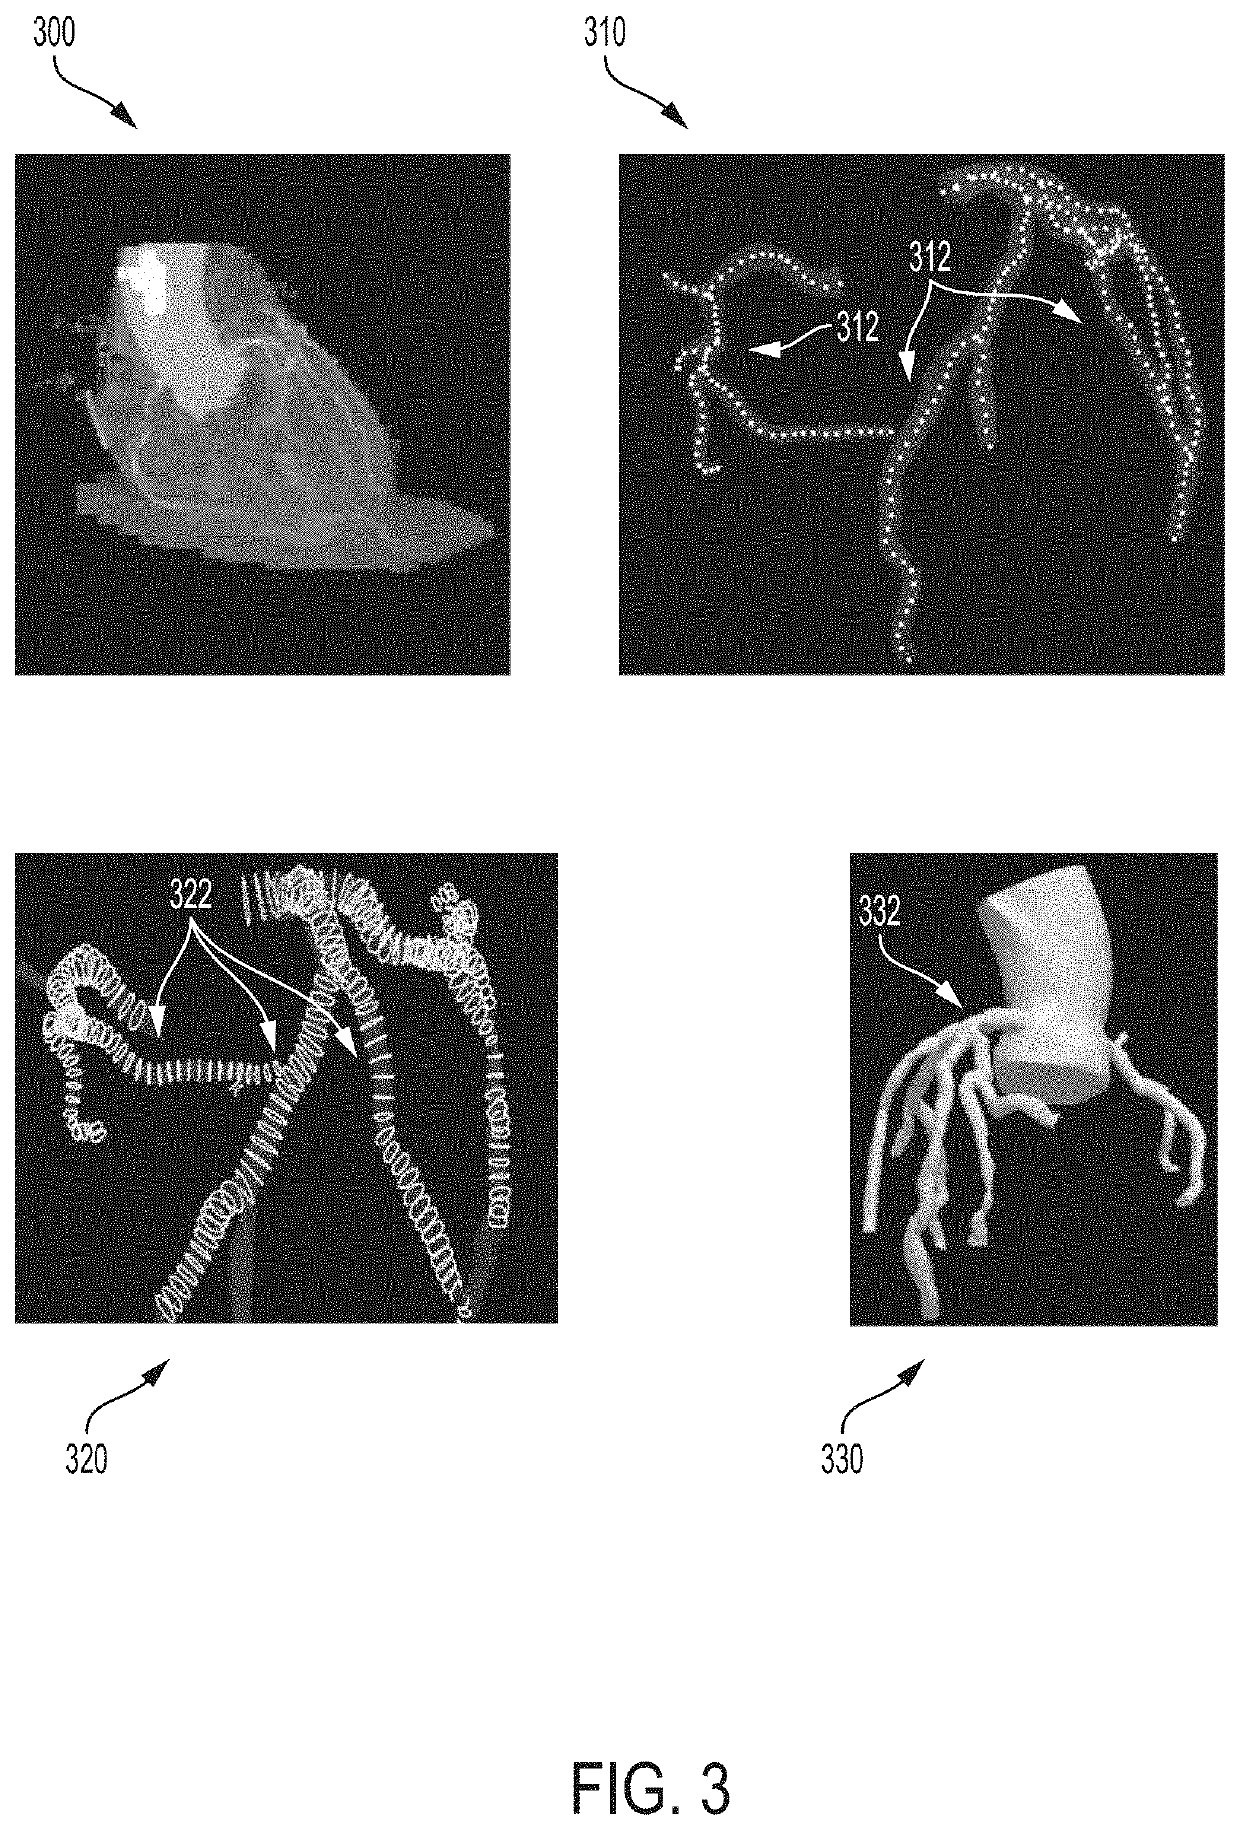 Method and system for non-invasive functional assessment of coronary artery stenosis using flow computations in diseased and hypothetical normal anatomical models